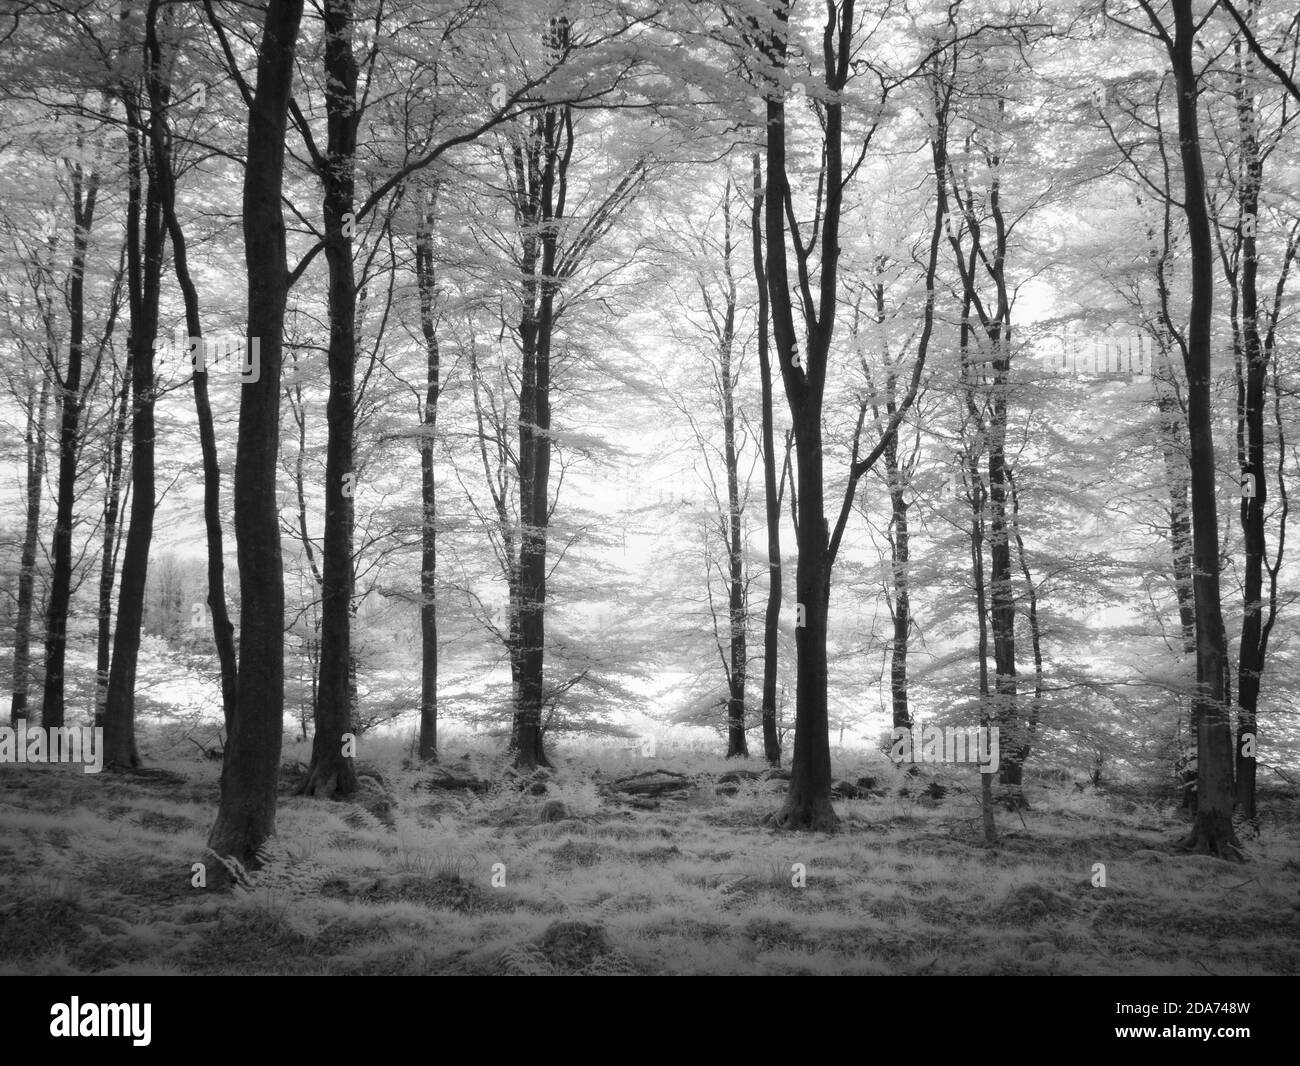 An infrared black and white image of the edge of a beech woodland in the Mendip Hills, Somerset, England. Stock Photo